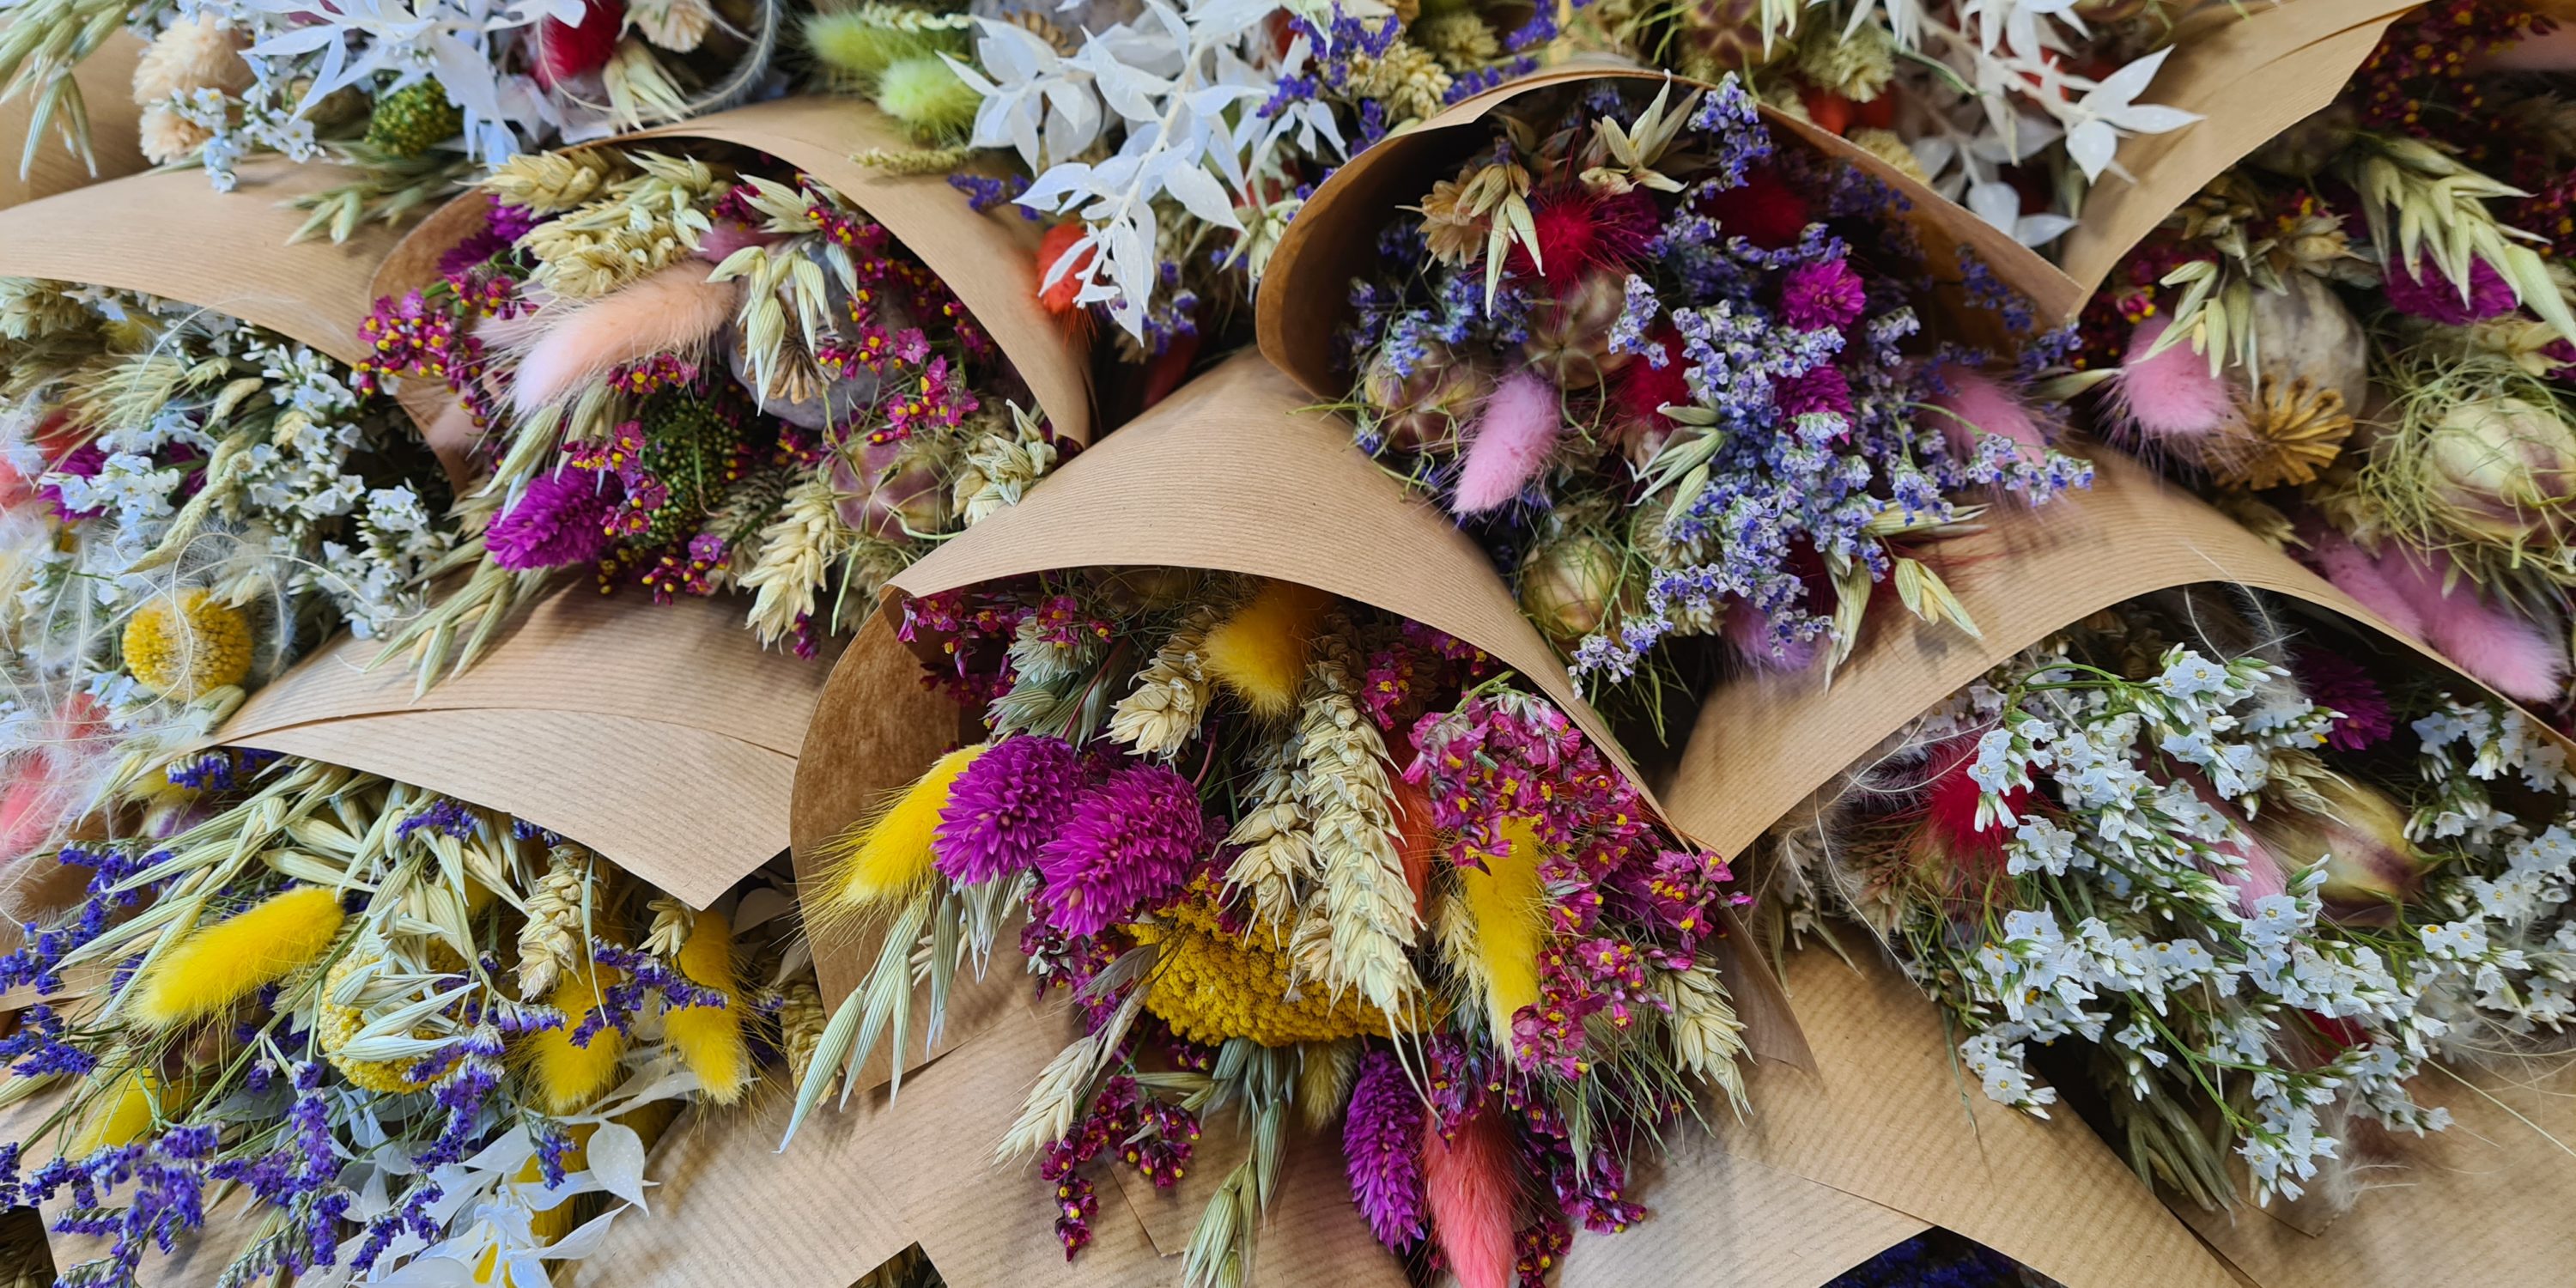 Dried flowers-dried flower gifts-nationwide postage